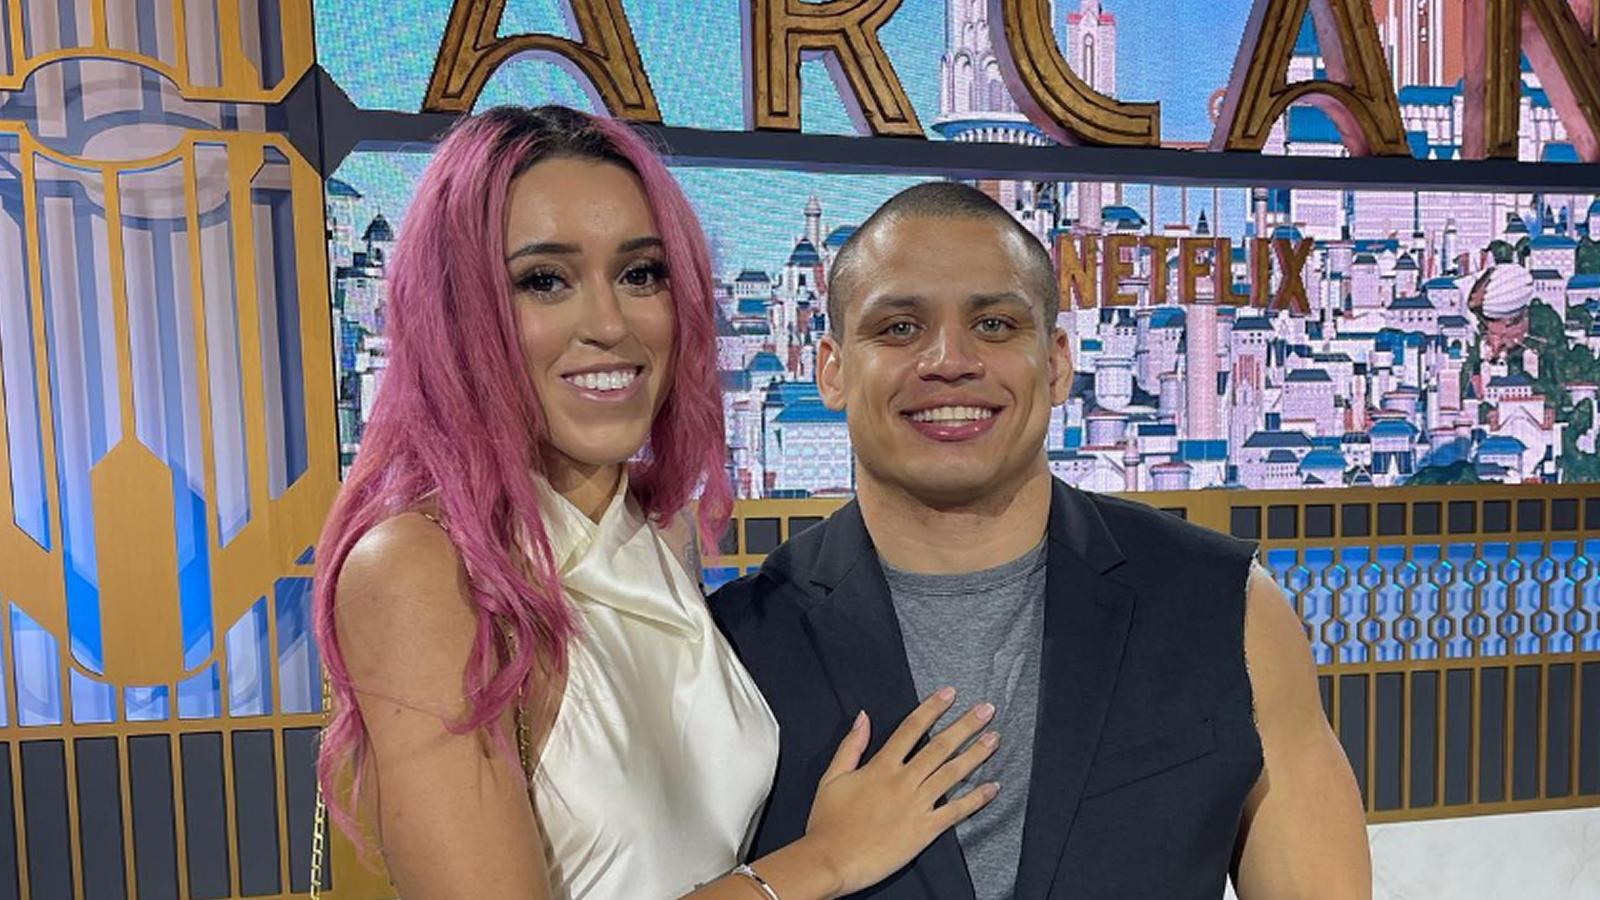 Tyler1 and Macaiyla reveal heartbreaking details of life-threatening miscarriage